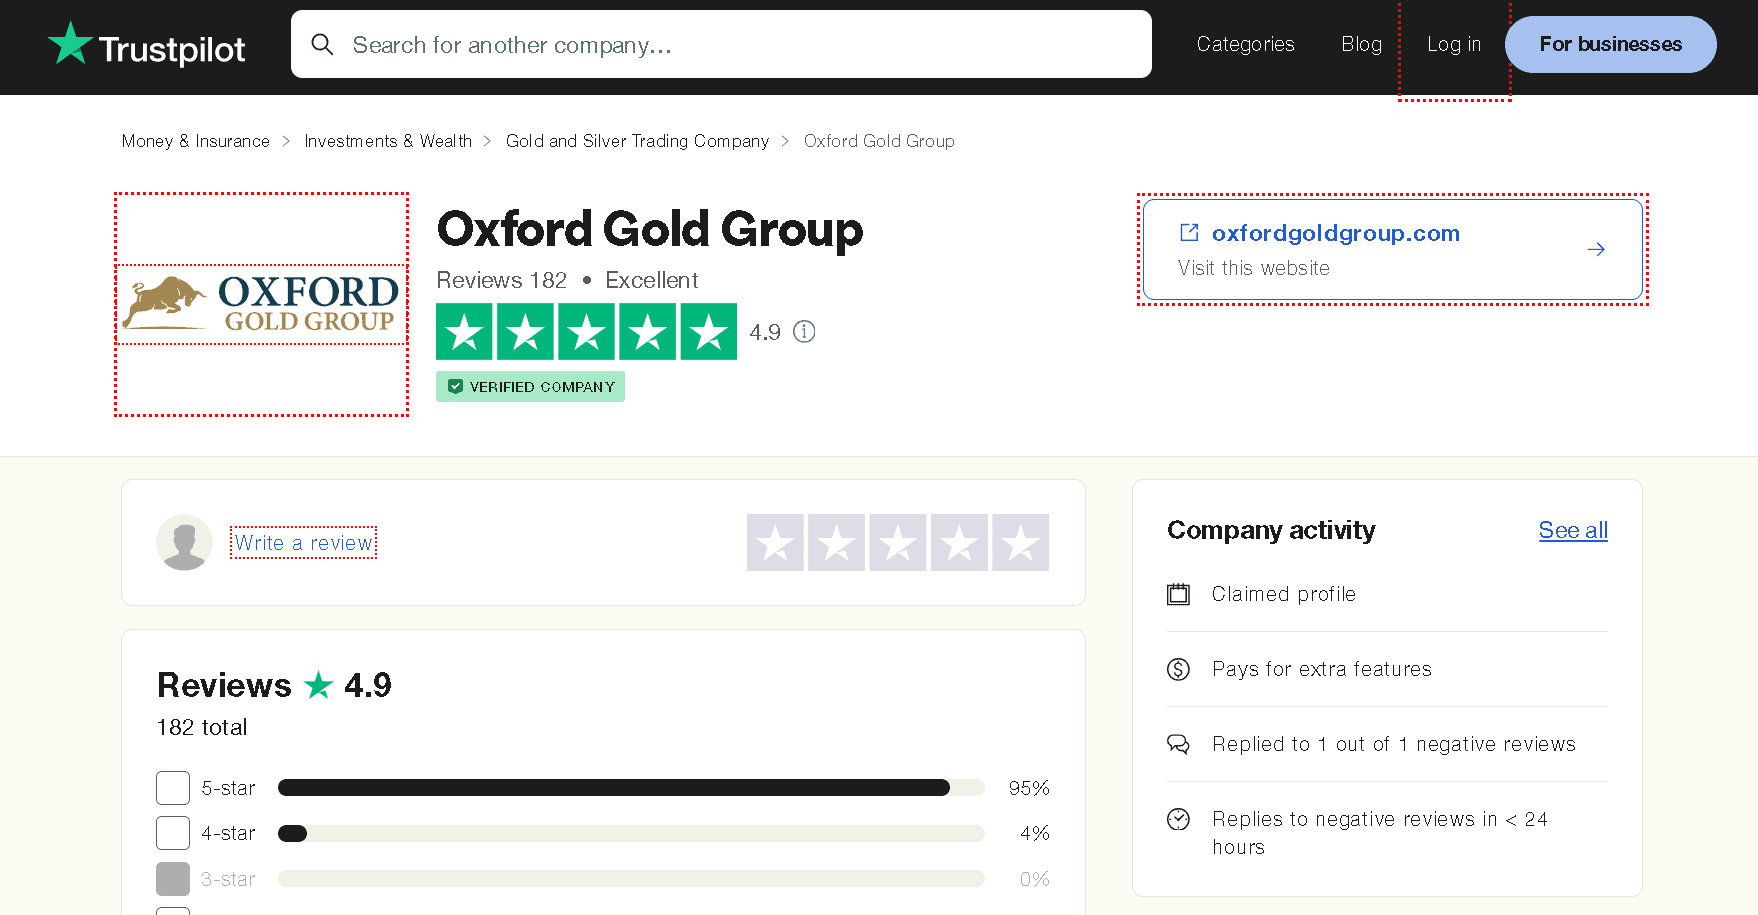 Oxford Gold Group ConsumerAffairs profile and customer reviews